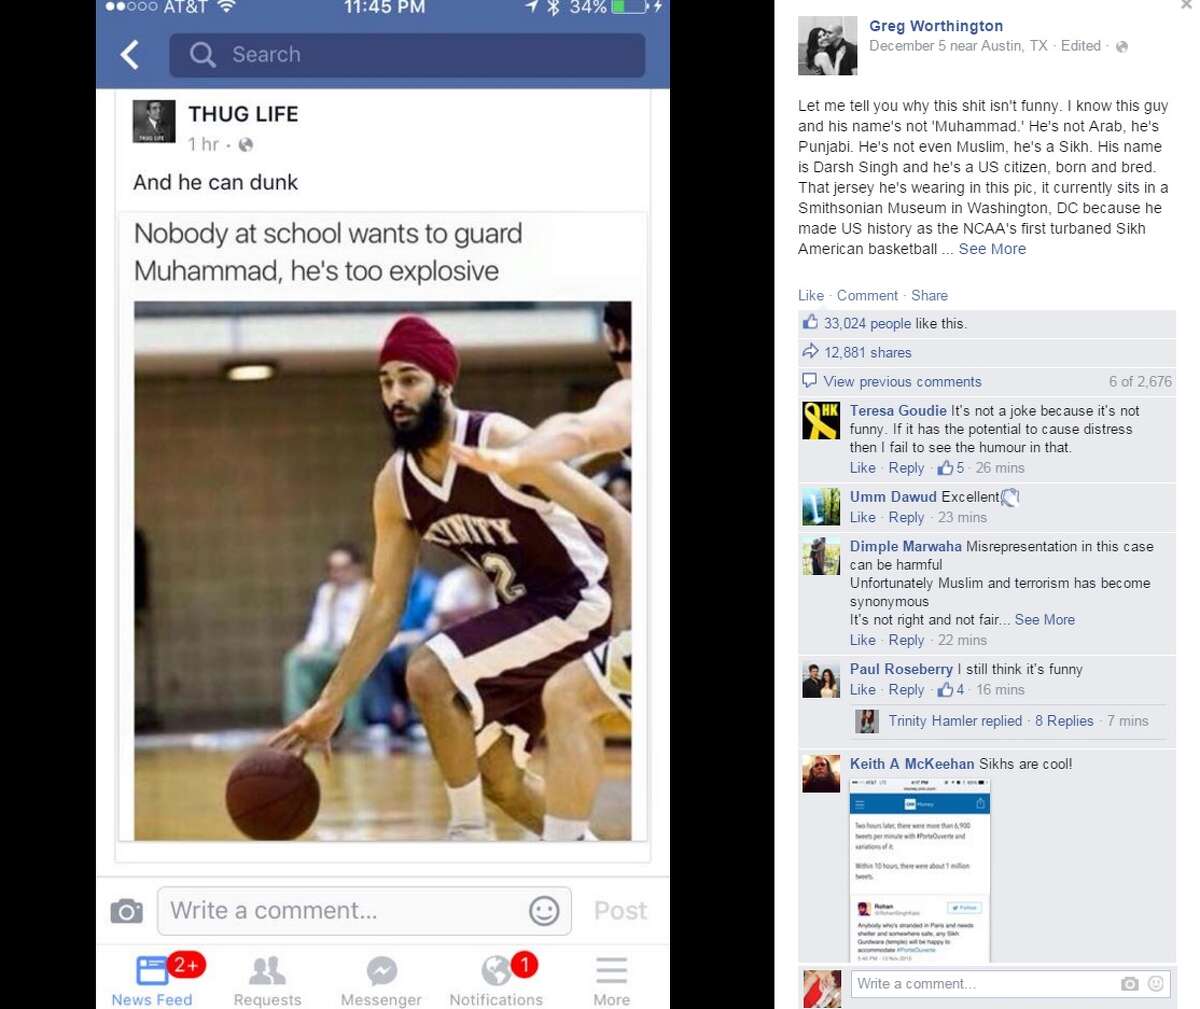 A meme intended to get a few laughs on the internet inadvertently became a viral lesson taught by a San Antonio native who refused to watch his Sikh friend and others from become the butt of a derogatory joke.